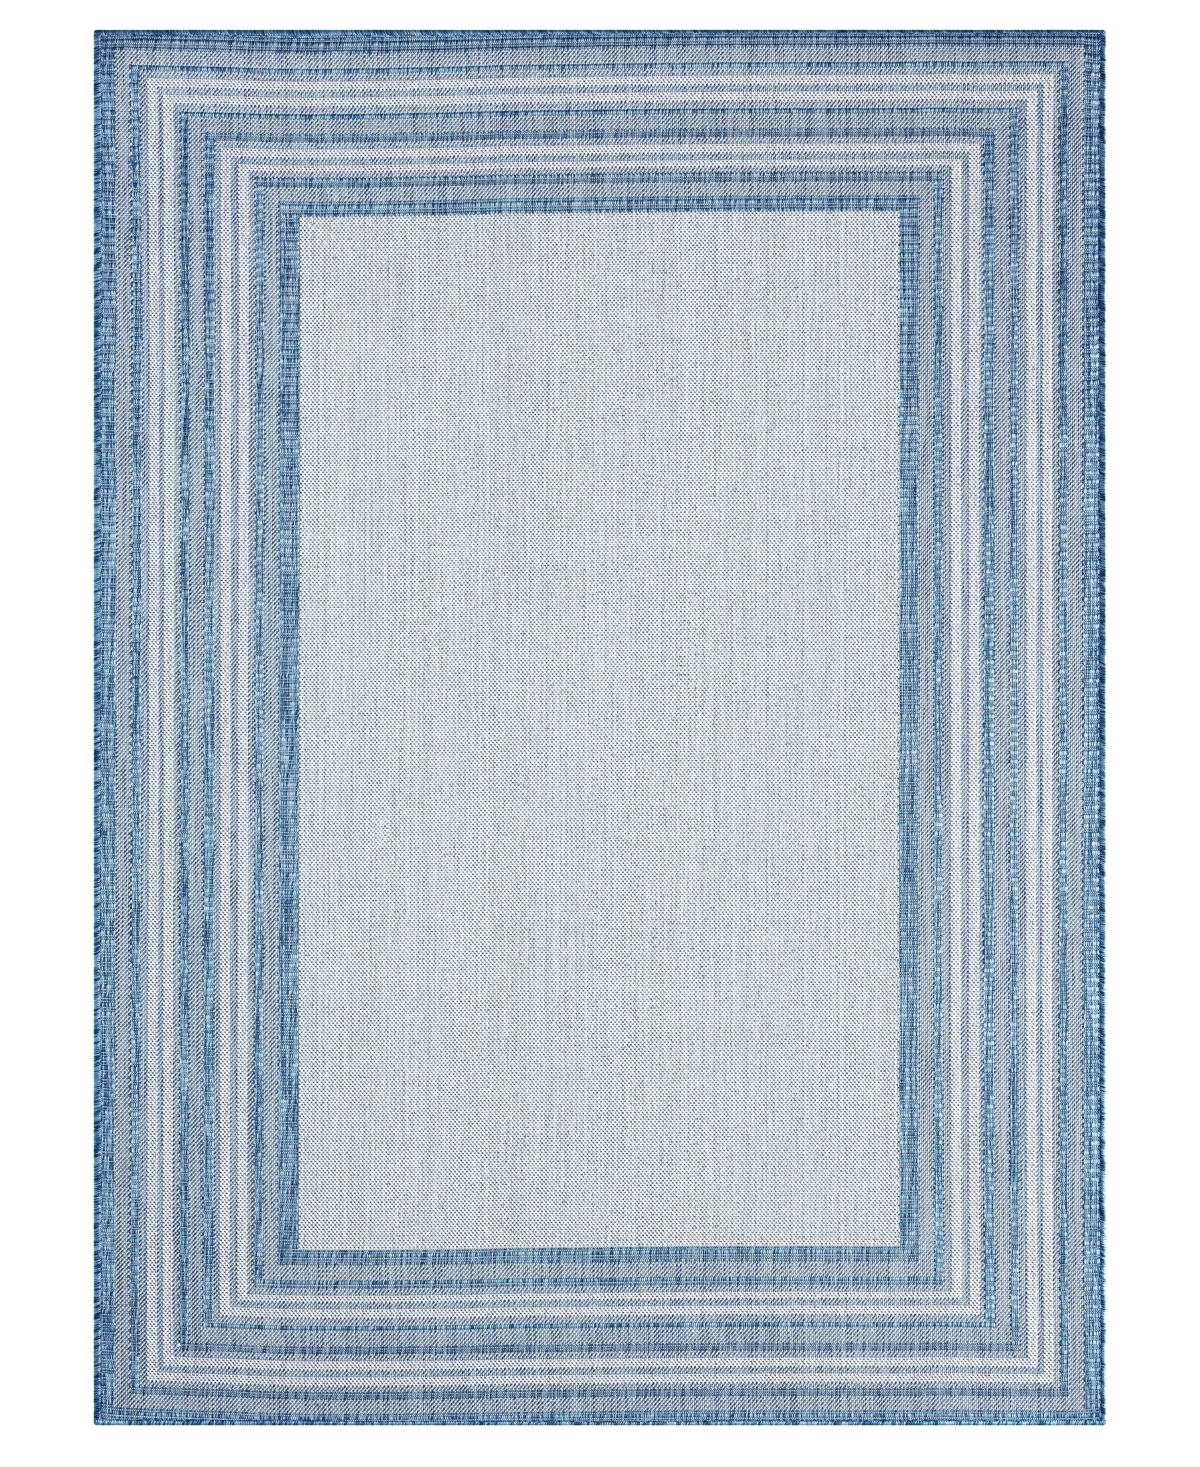 Nicole Miller Patio Country Layla 5'2" X 7'2" Area Rug In Cream/blue